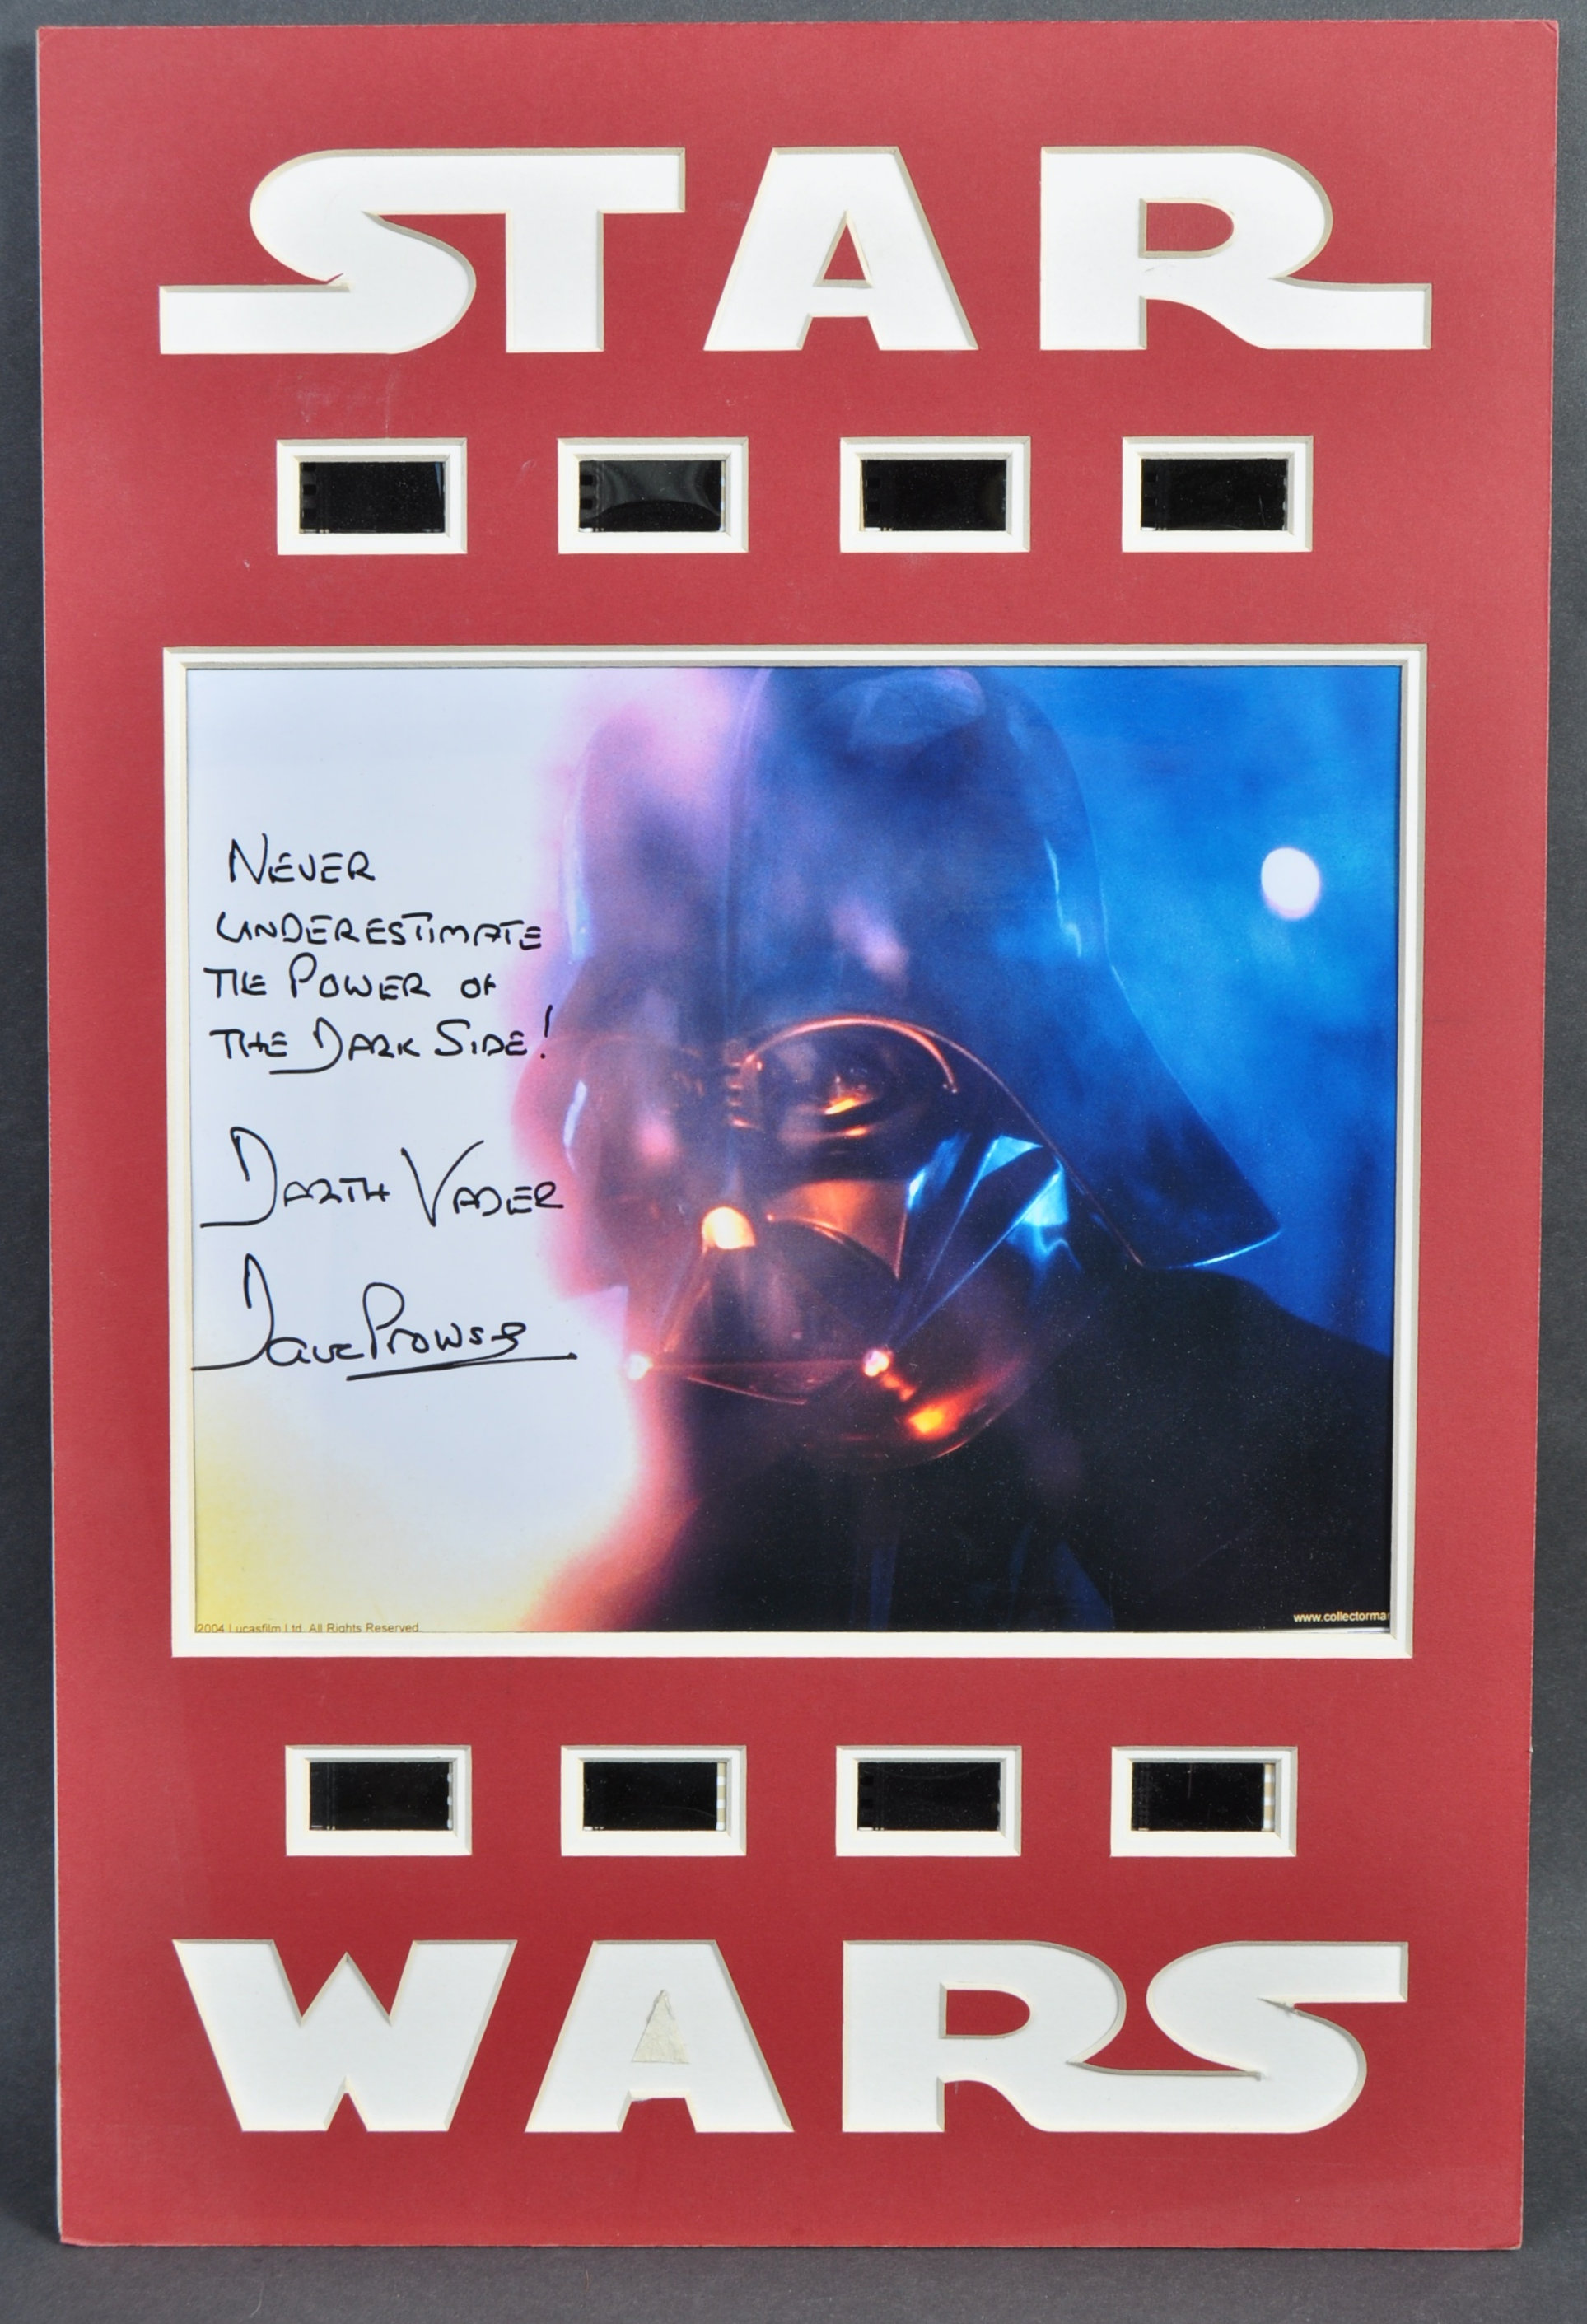 ESTATE OF DAVE PROWSE - AUTOGRAPH & FILM CEL DISPLAY